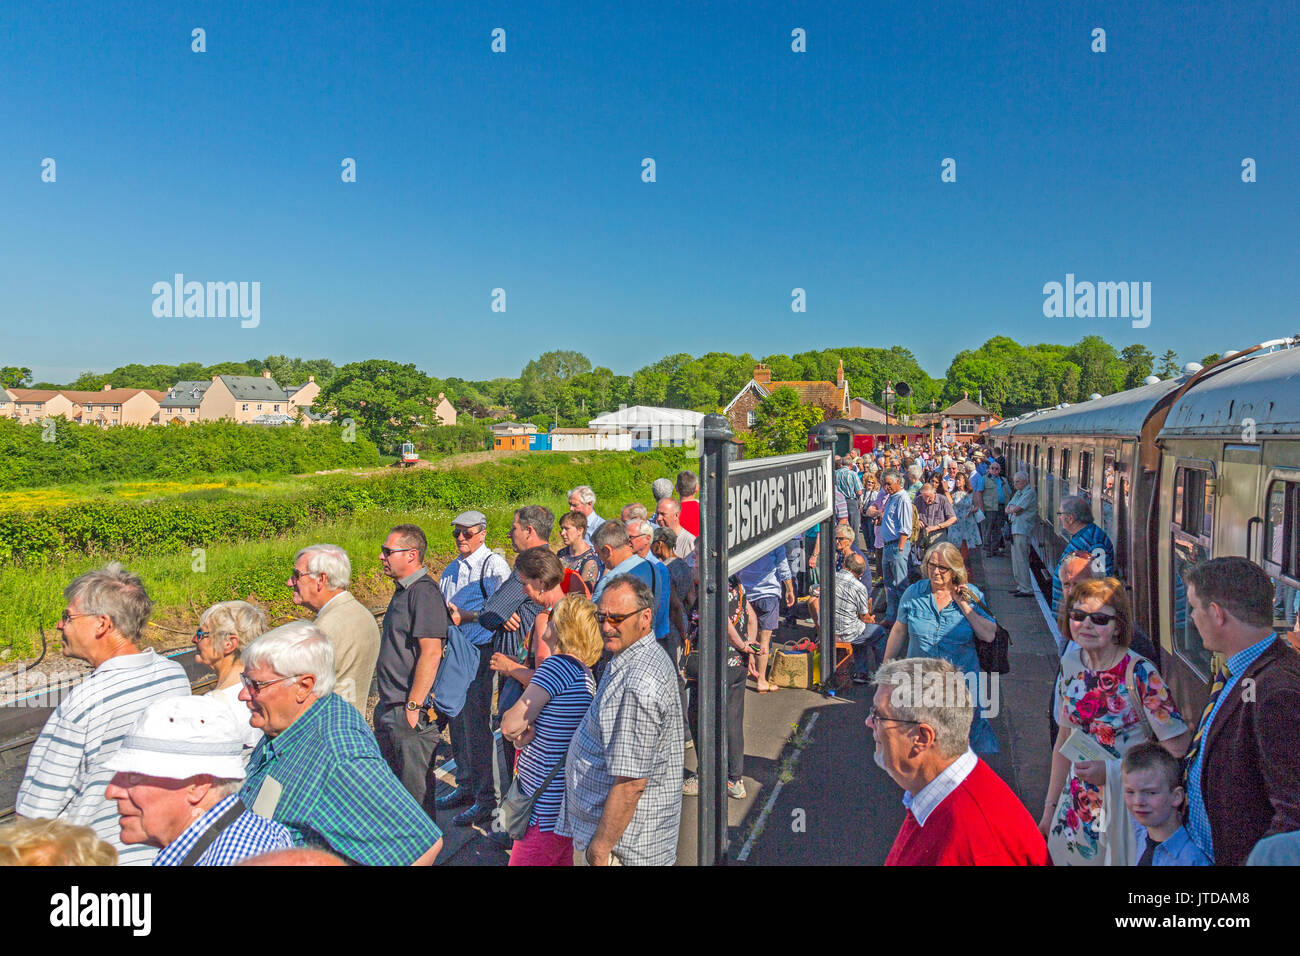 A platform packed with people waiting for the arrival of LNER steam locomotive 'Flying Scotsman' at Bishops Lydeard, West Somerset Railway, England UK Stock Photo